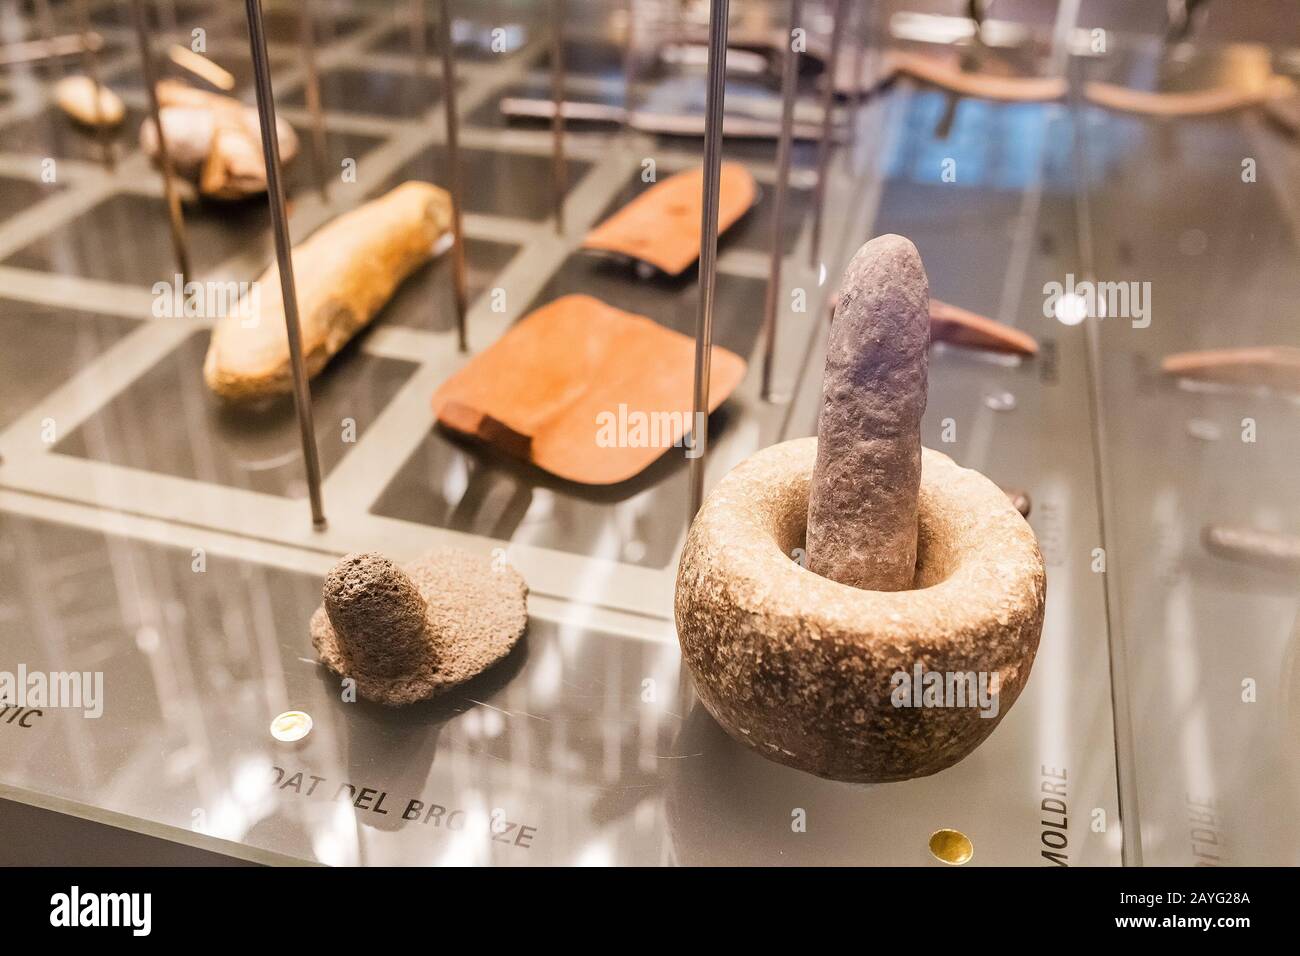 28 JULY 2018, BARCELONA, SPAIN: Ancient stone age tools and mortar, archeology concept Stock Photo